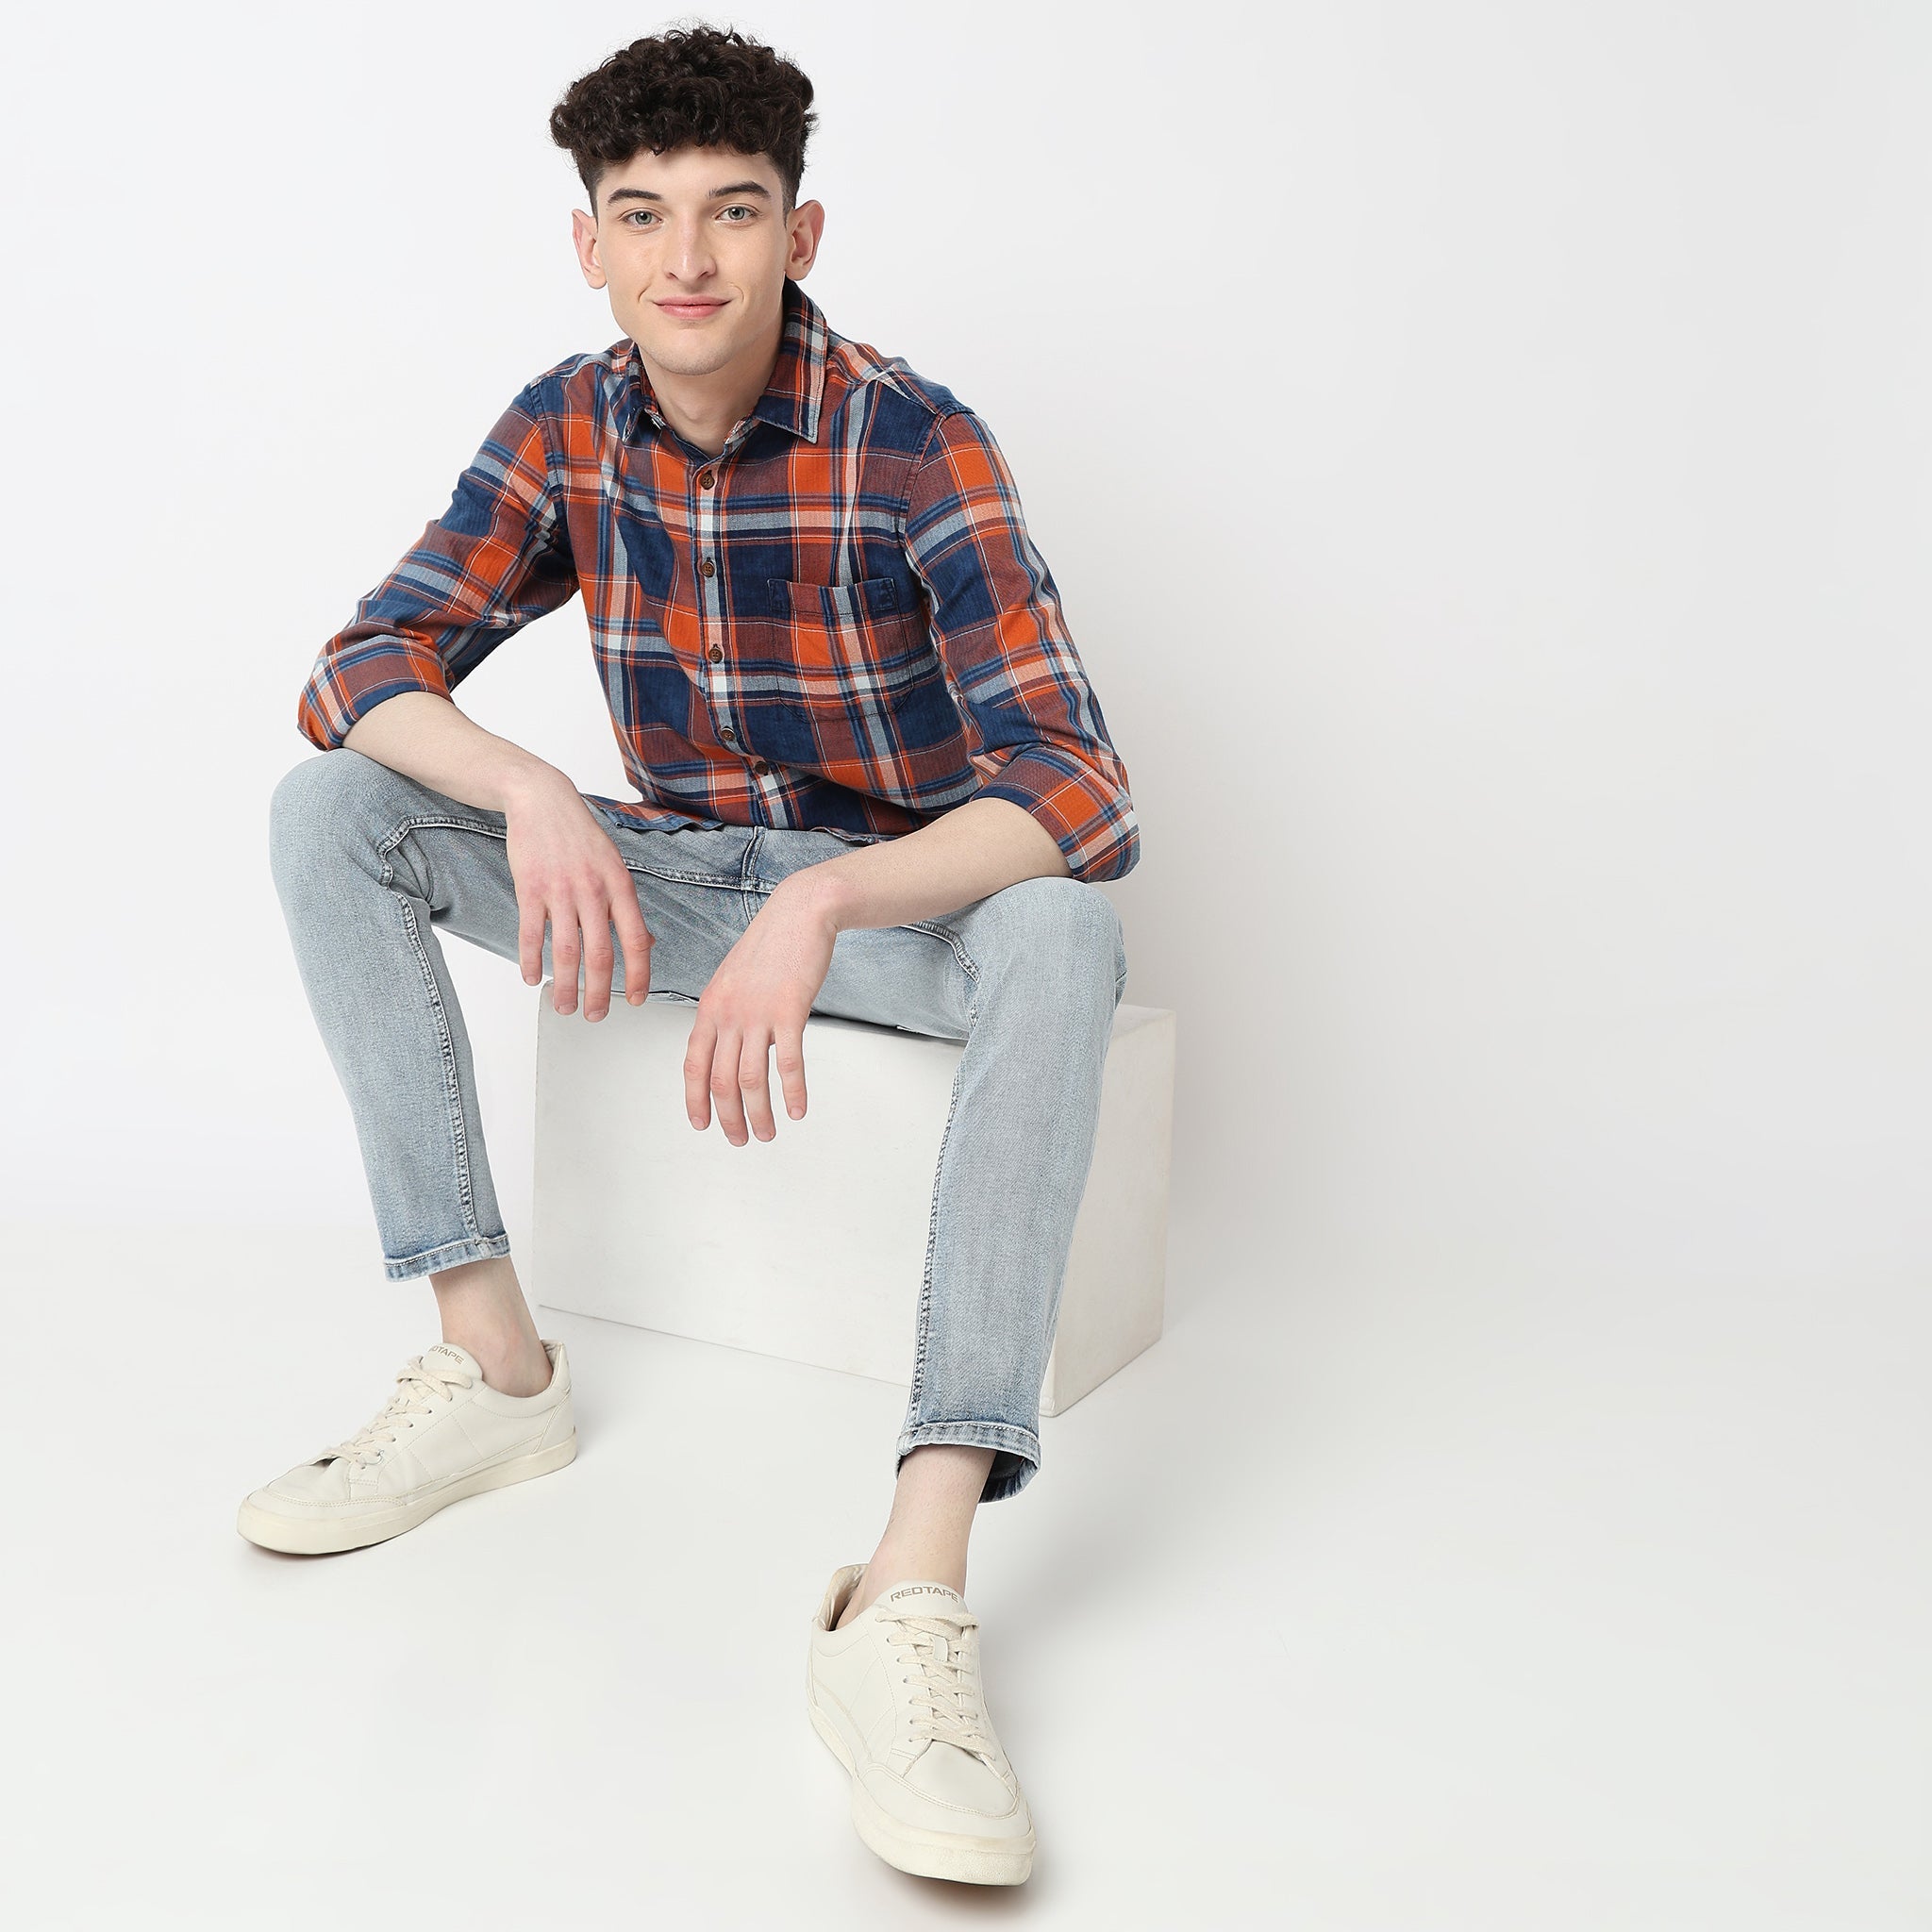 Men Wearing Relaxed Fit Checkered Shirt